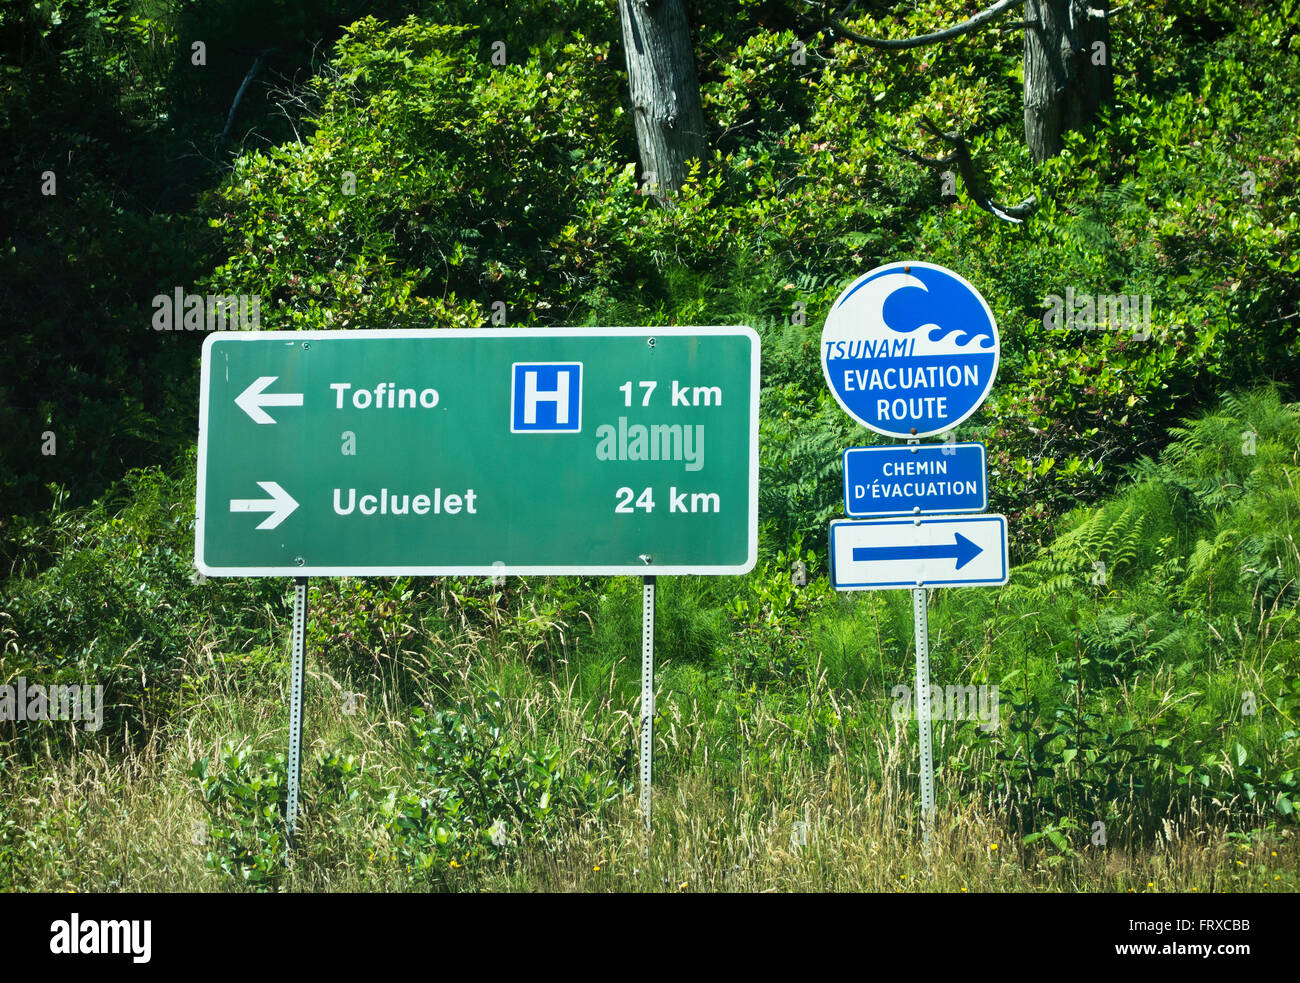 Sign for Tofino and Ucluelet and for the Tsunami Evacuation Route.  Bilingual in French writing. Long Beach, BC, Canada Stock Photo